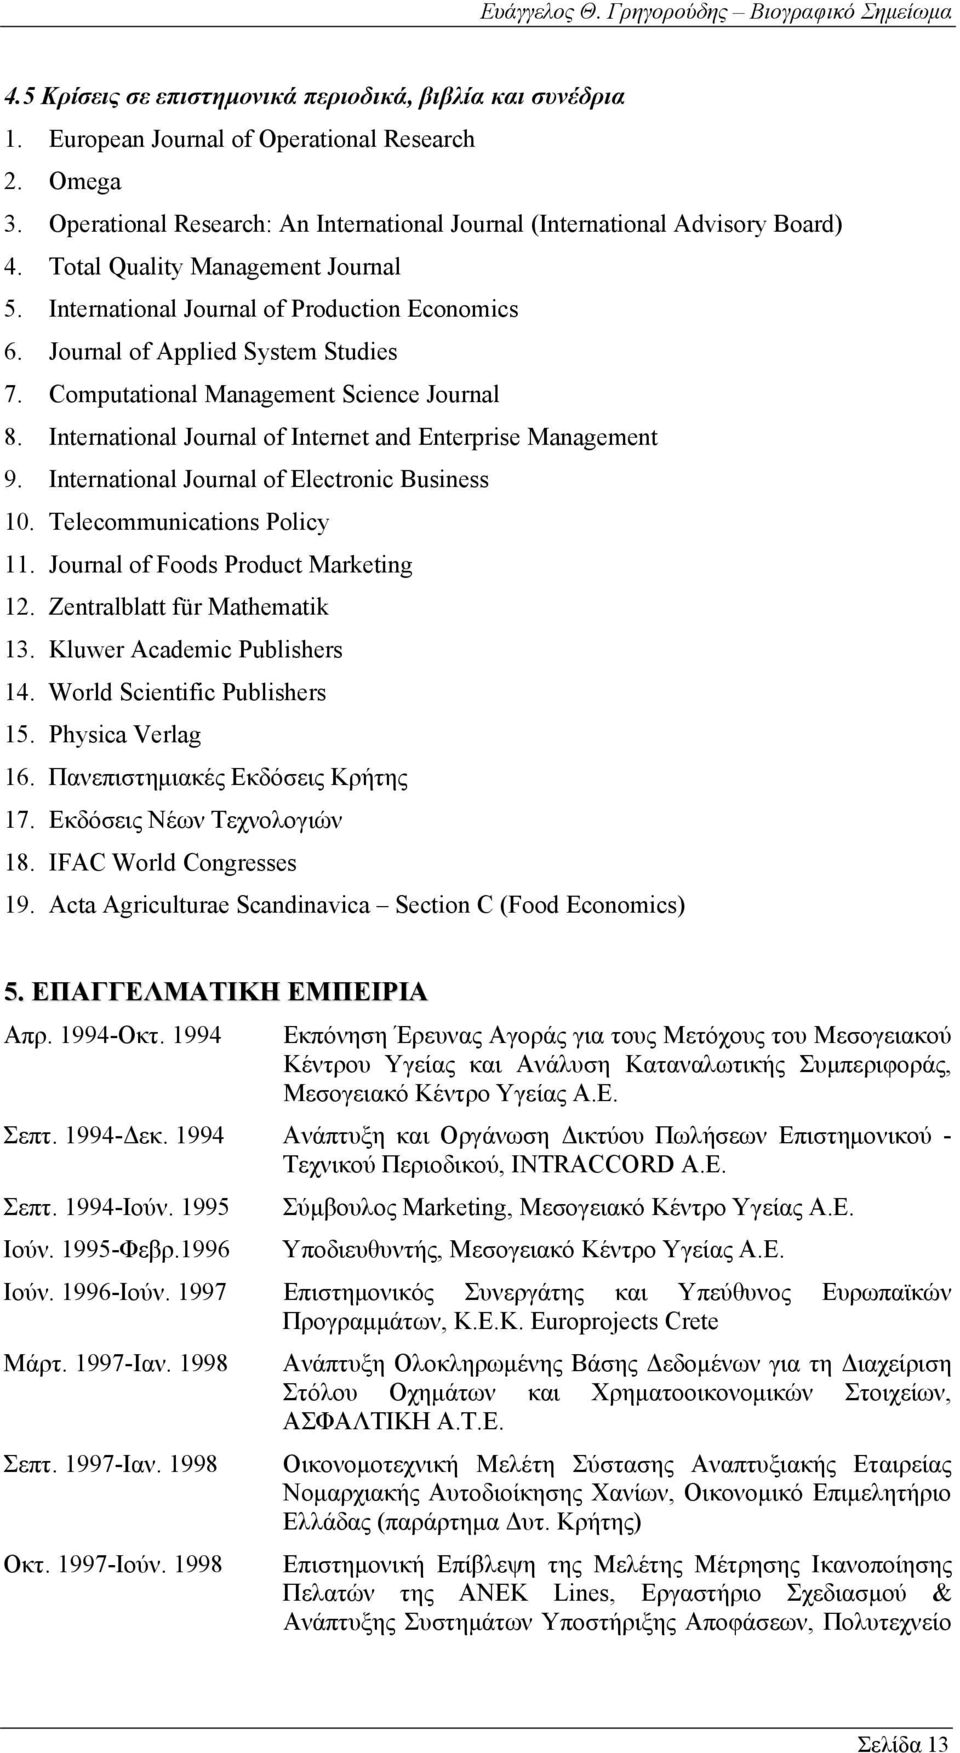 International Journal of Internet and Enterprise Management 9. International Journal of Electronic Business 10. Telecommunications Policy 11. Journal of Foods Product Marketing 12.